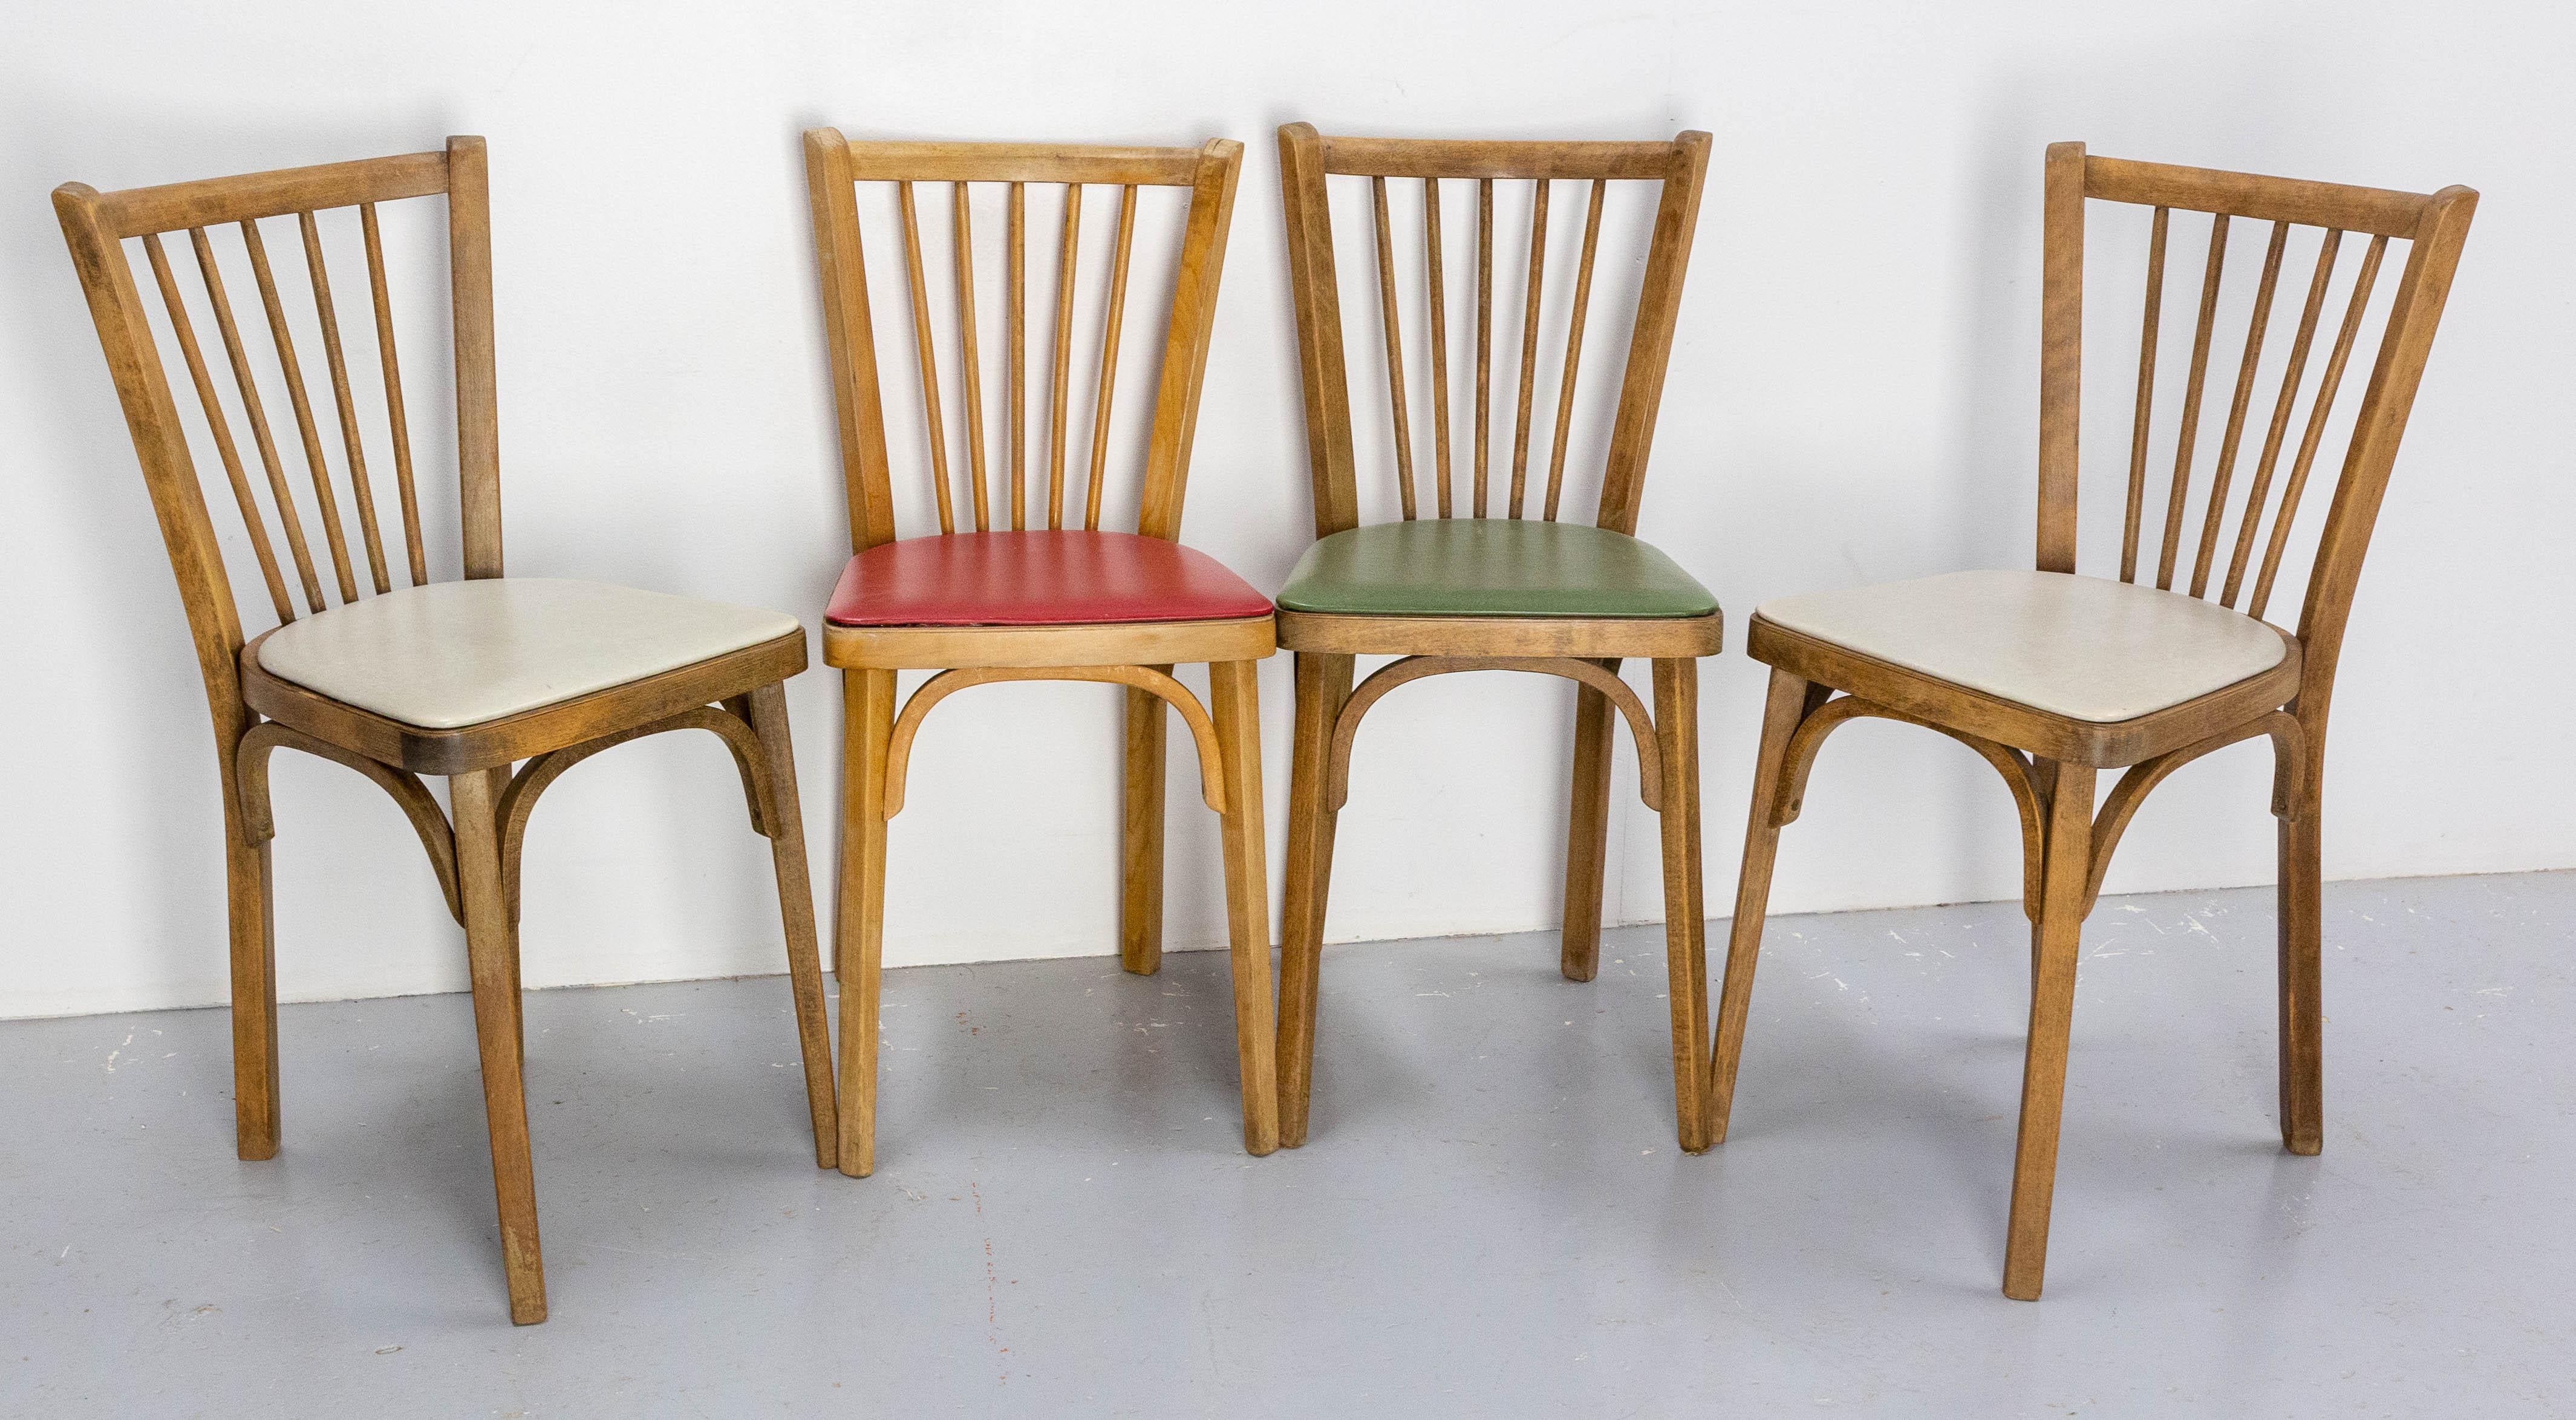 Four Bistro Dining Chairs Baumann Beech and Skai France Midcentury, circa 1950 For Sale 6